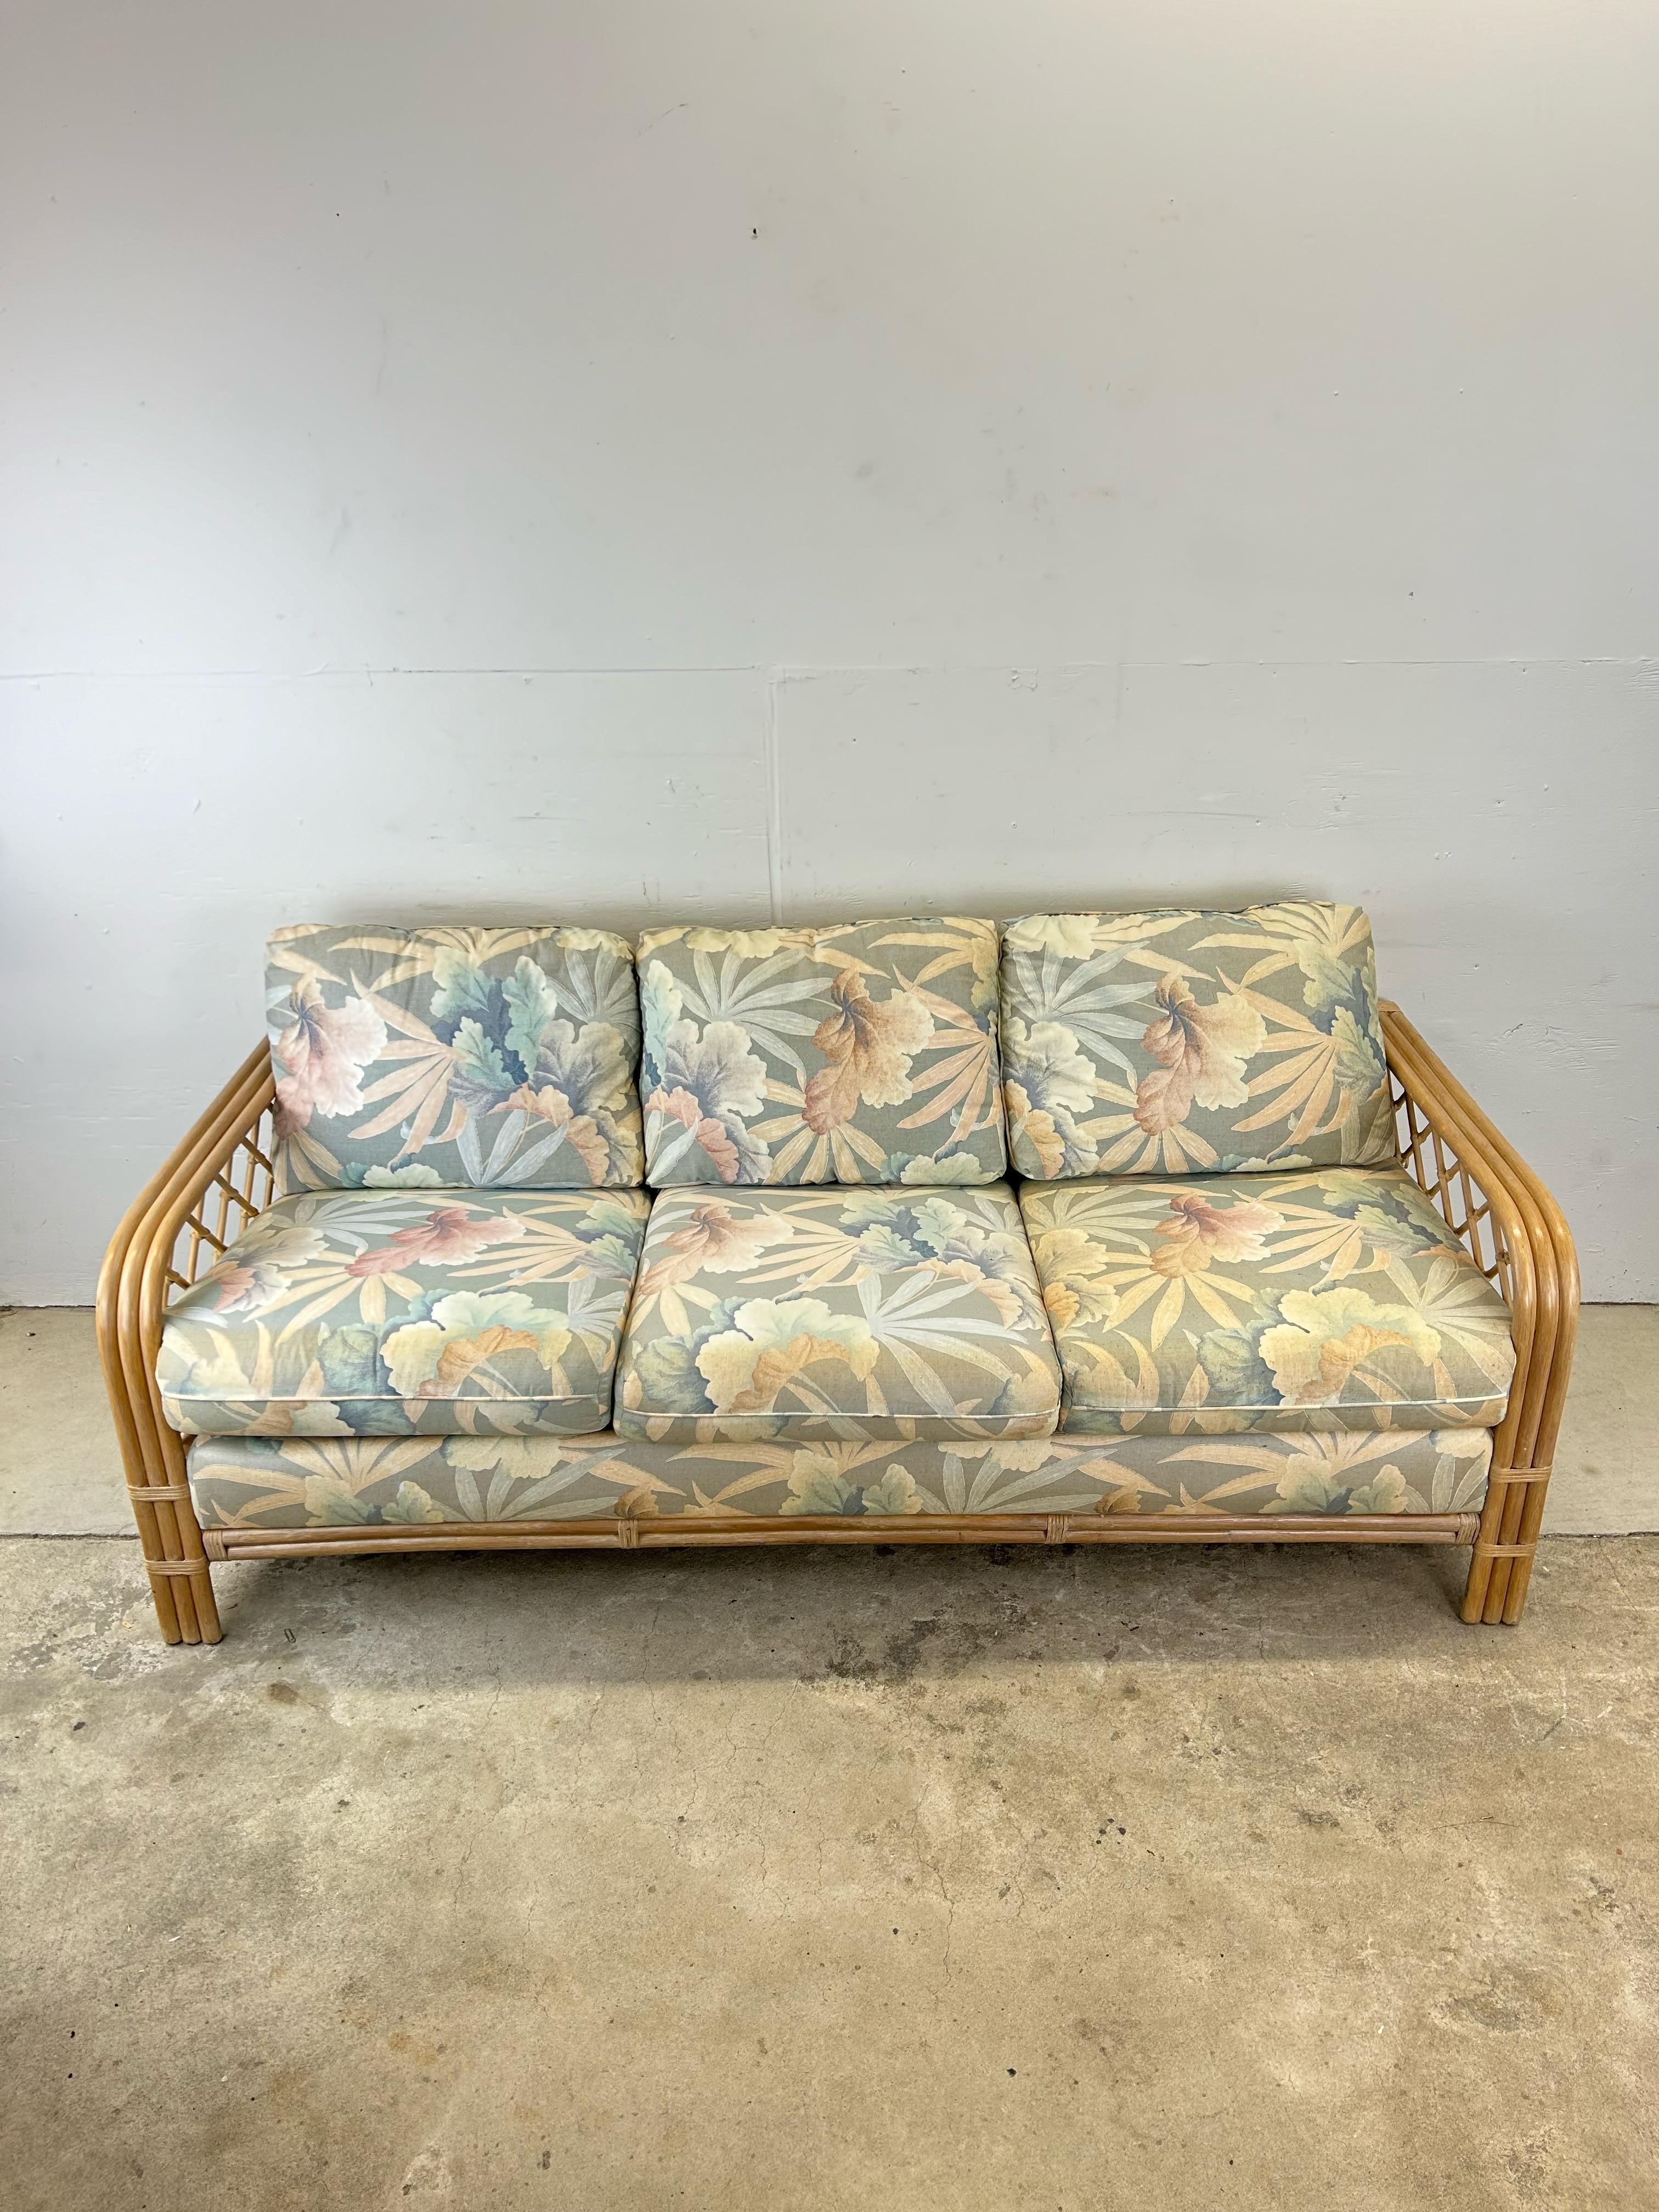 Bohemian Vintage Boho Chic Rattan 3 Seater Sofa with Floral Upholstery For Sale